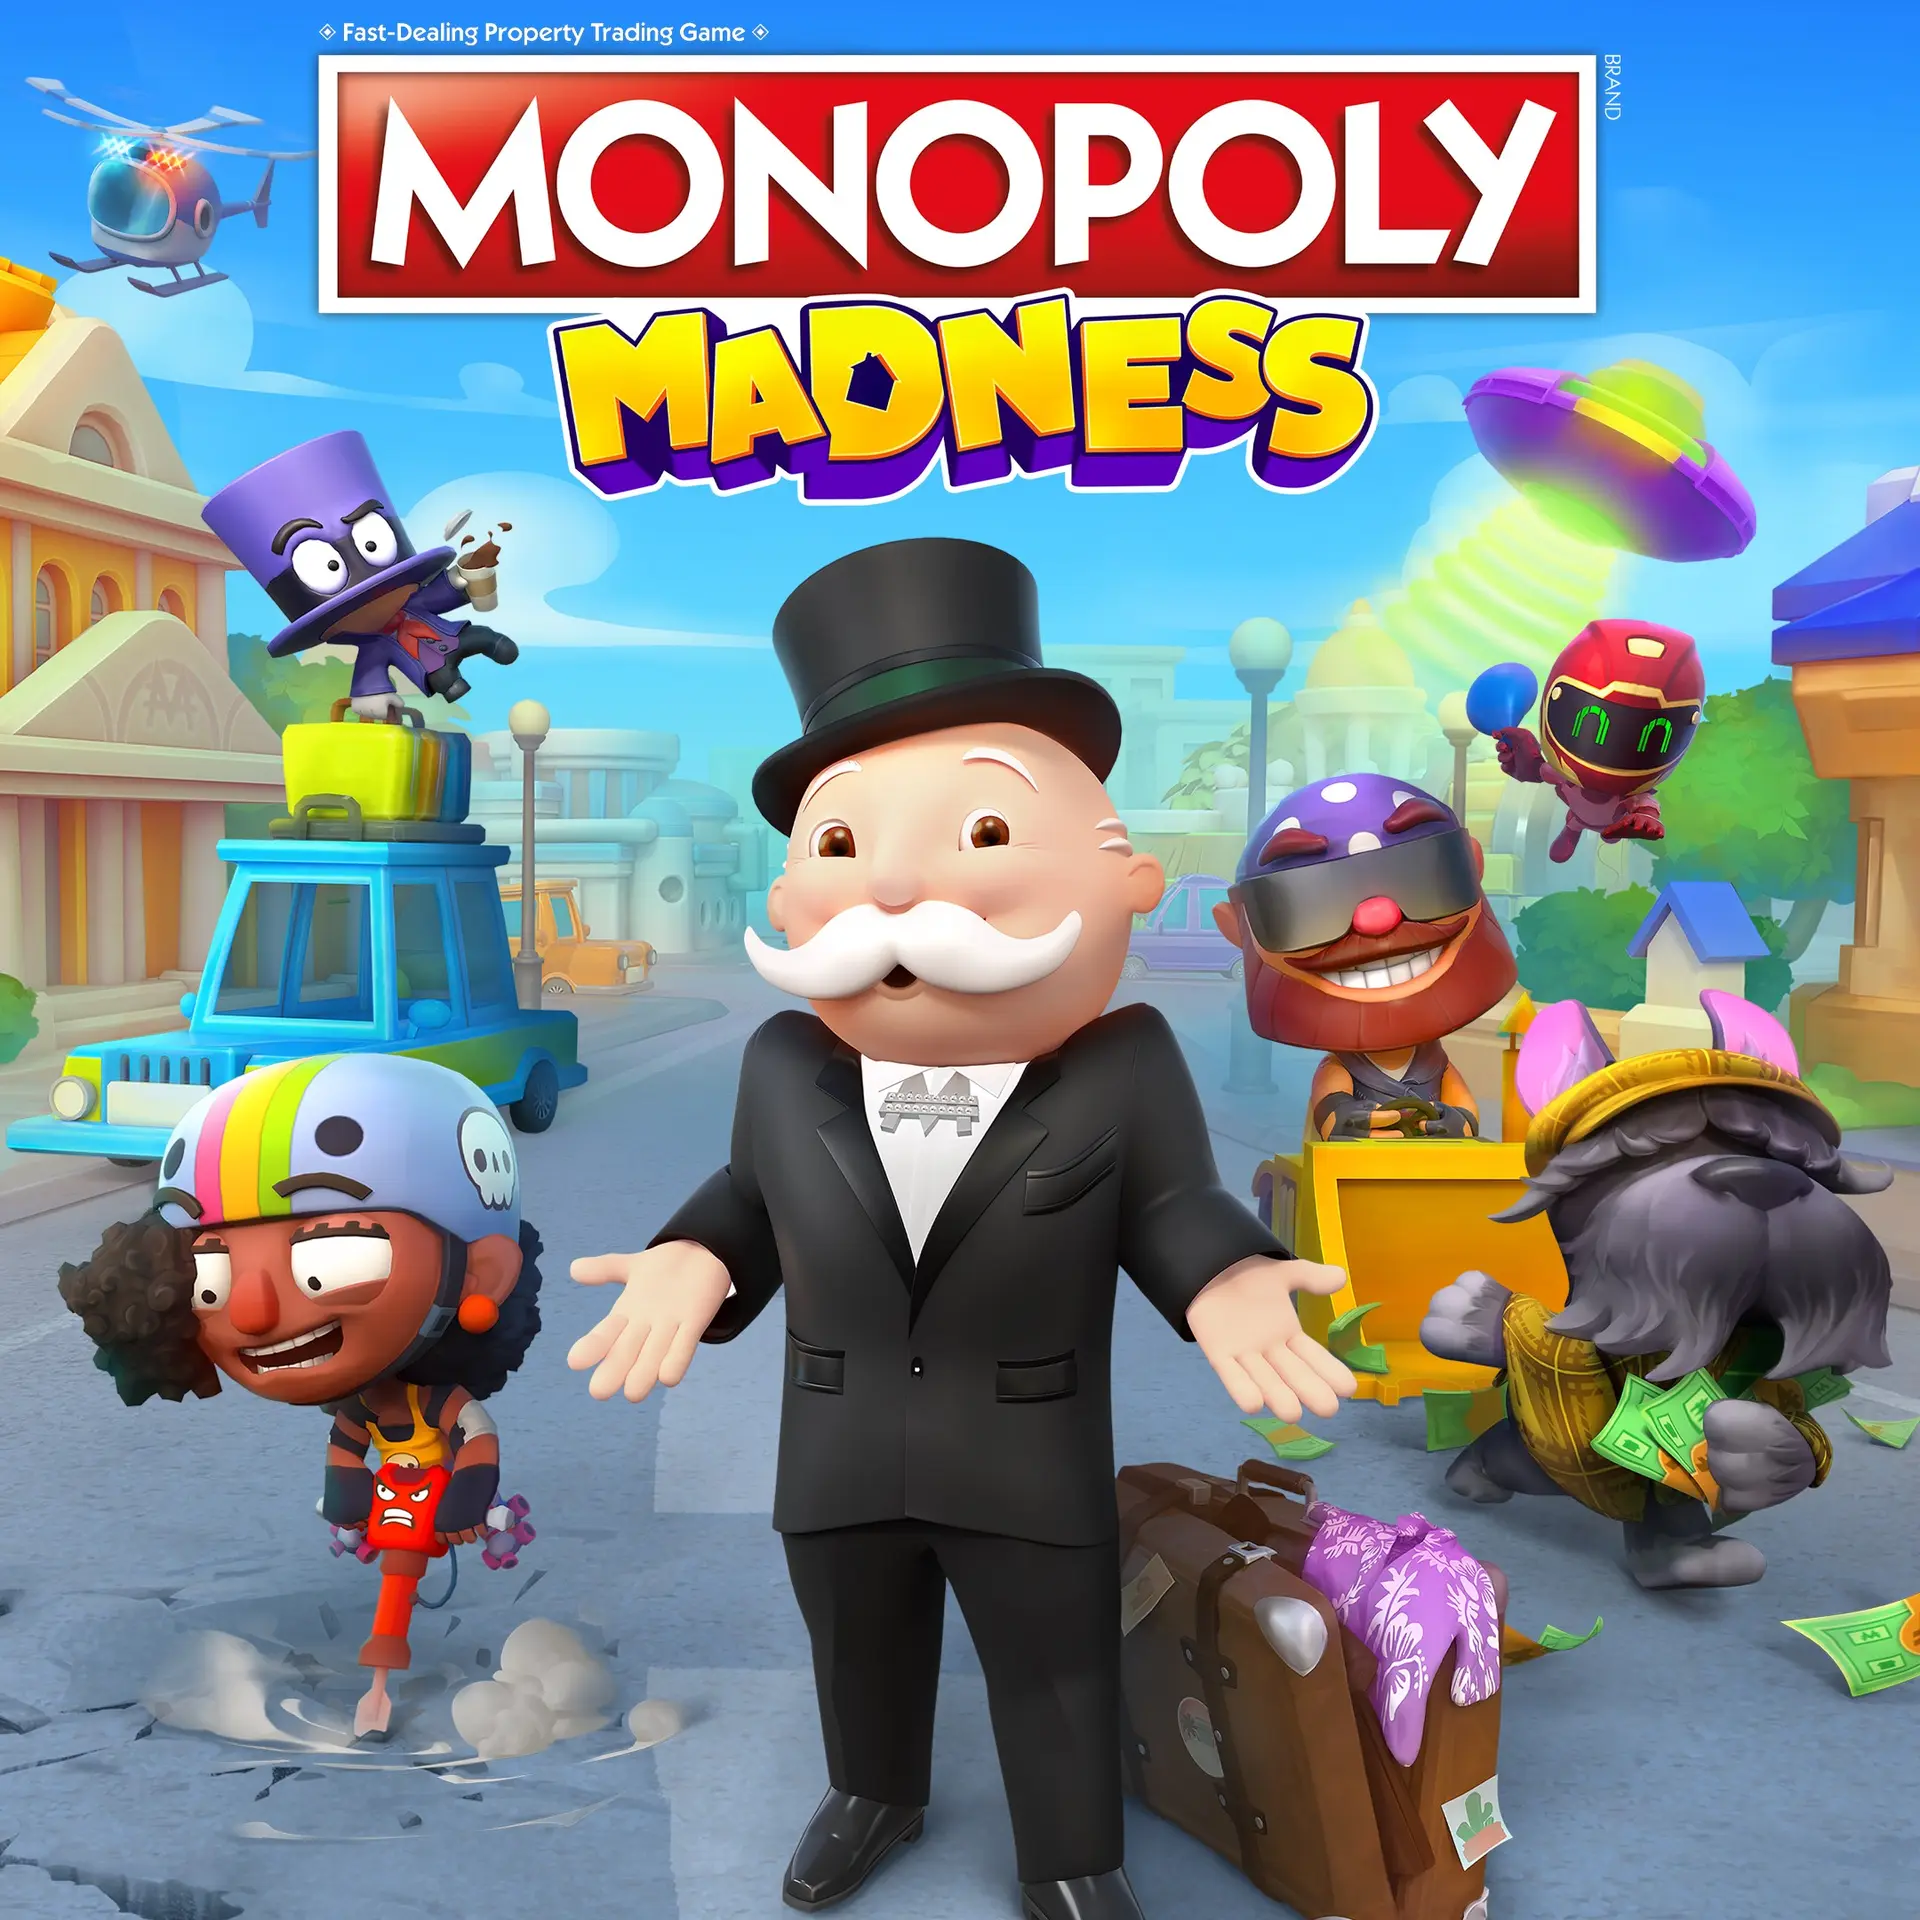 Monopoly Madness (XBOX One - Cheapest Store)